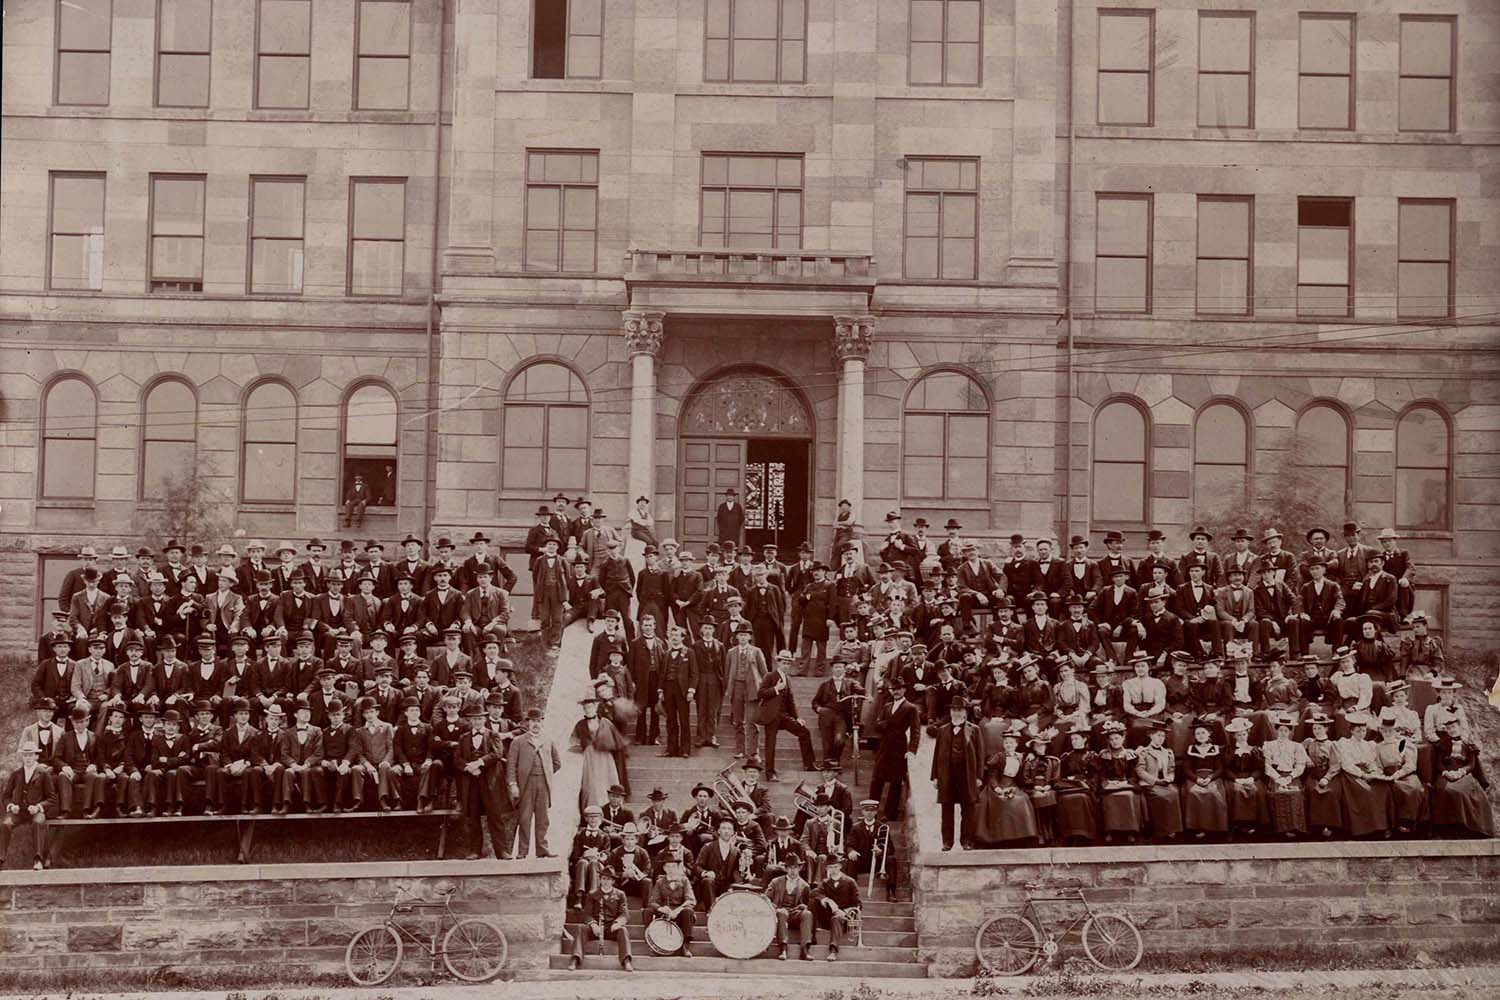 Augustana Band outside Old Main in the 1890s